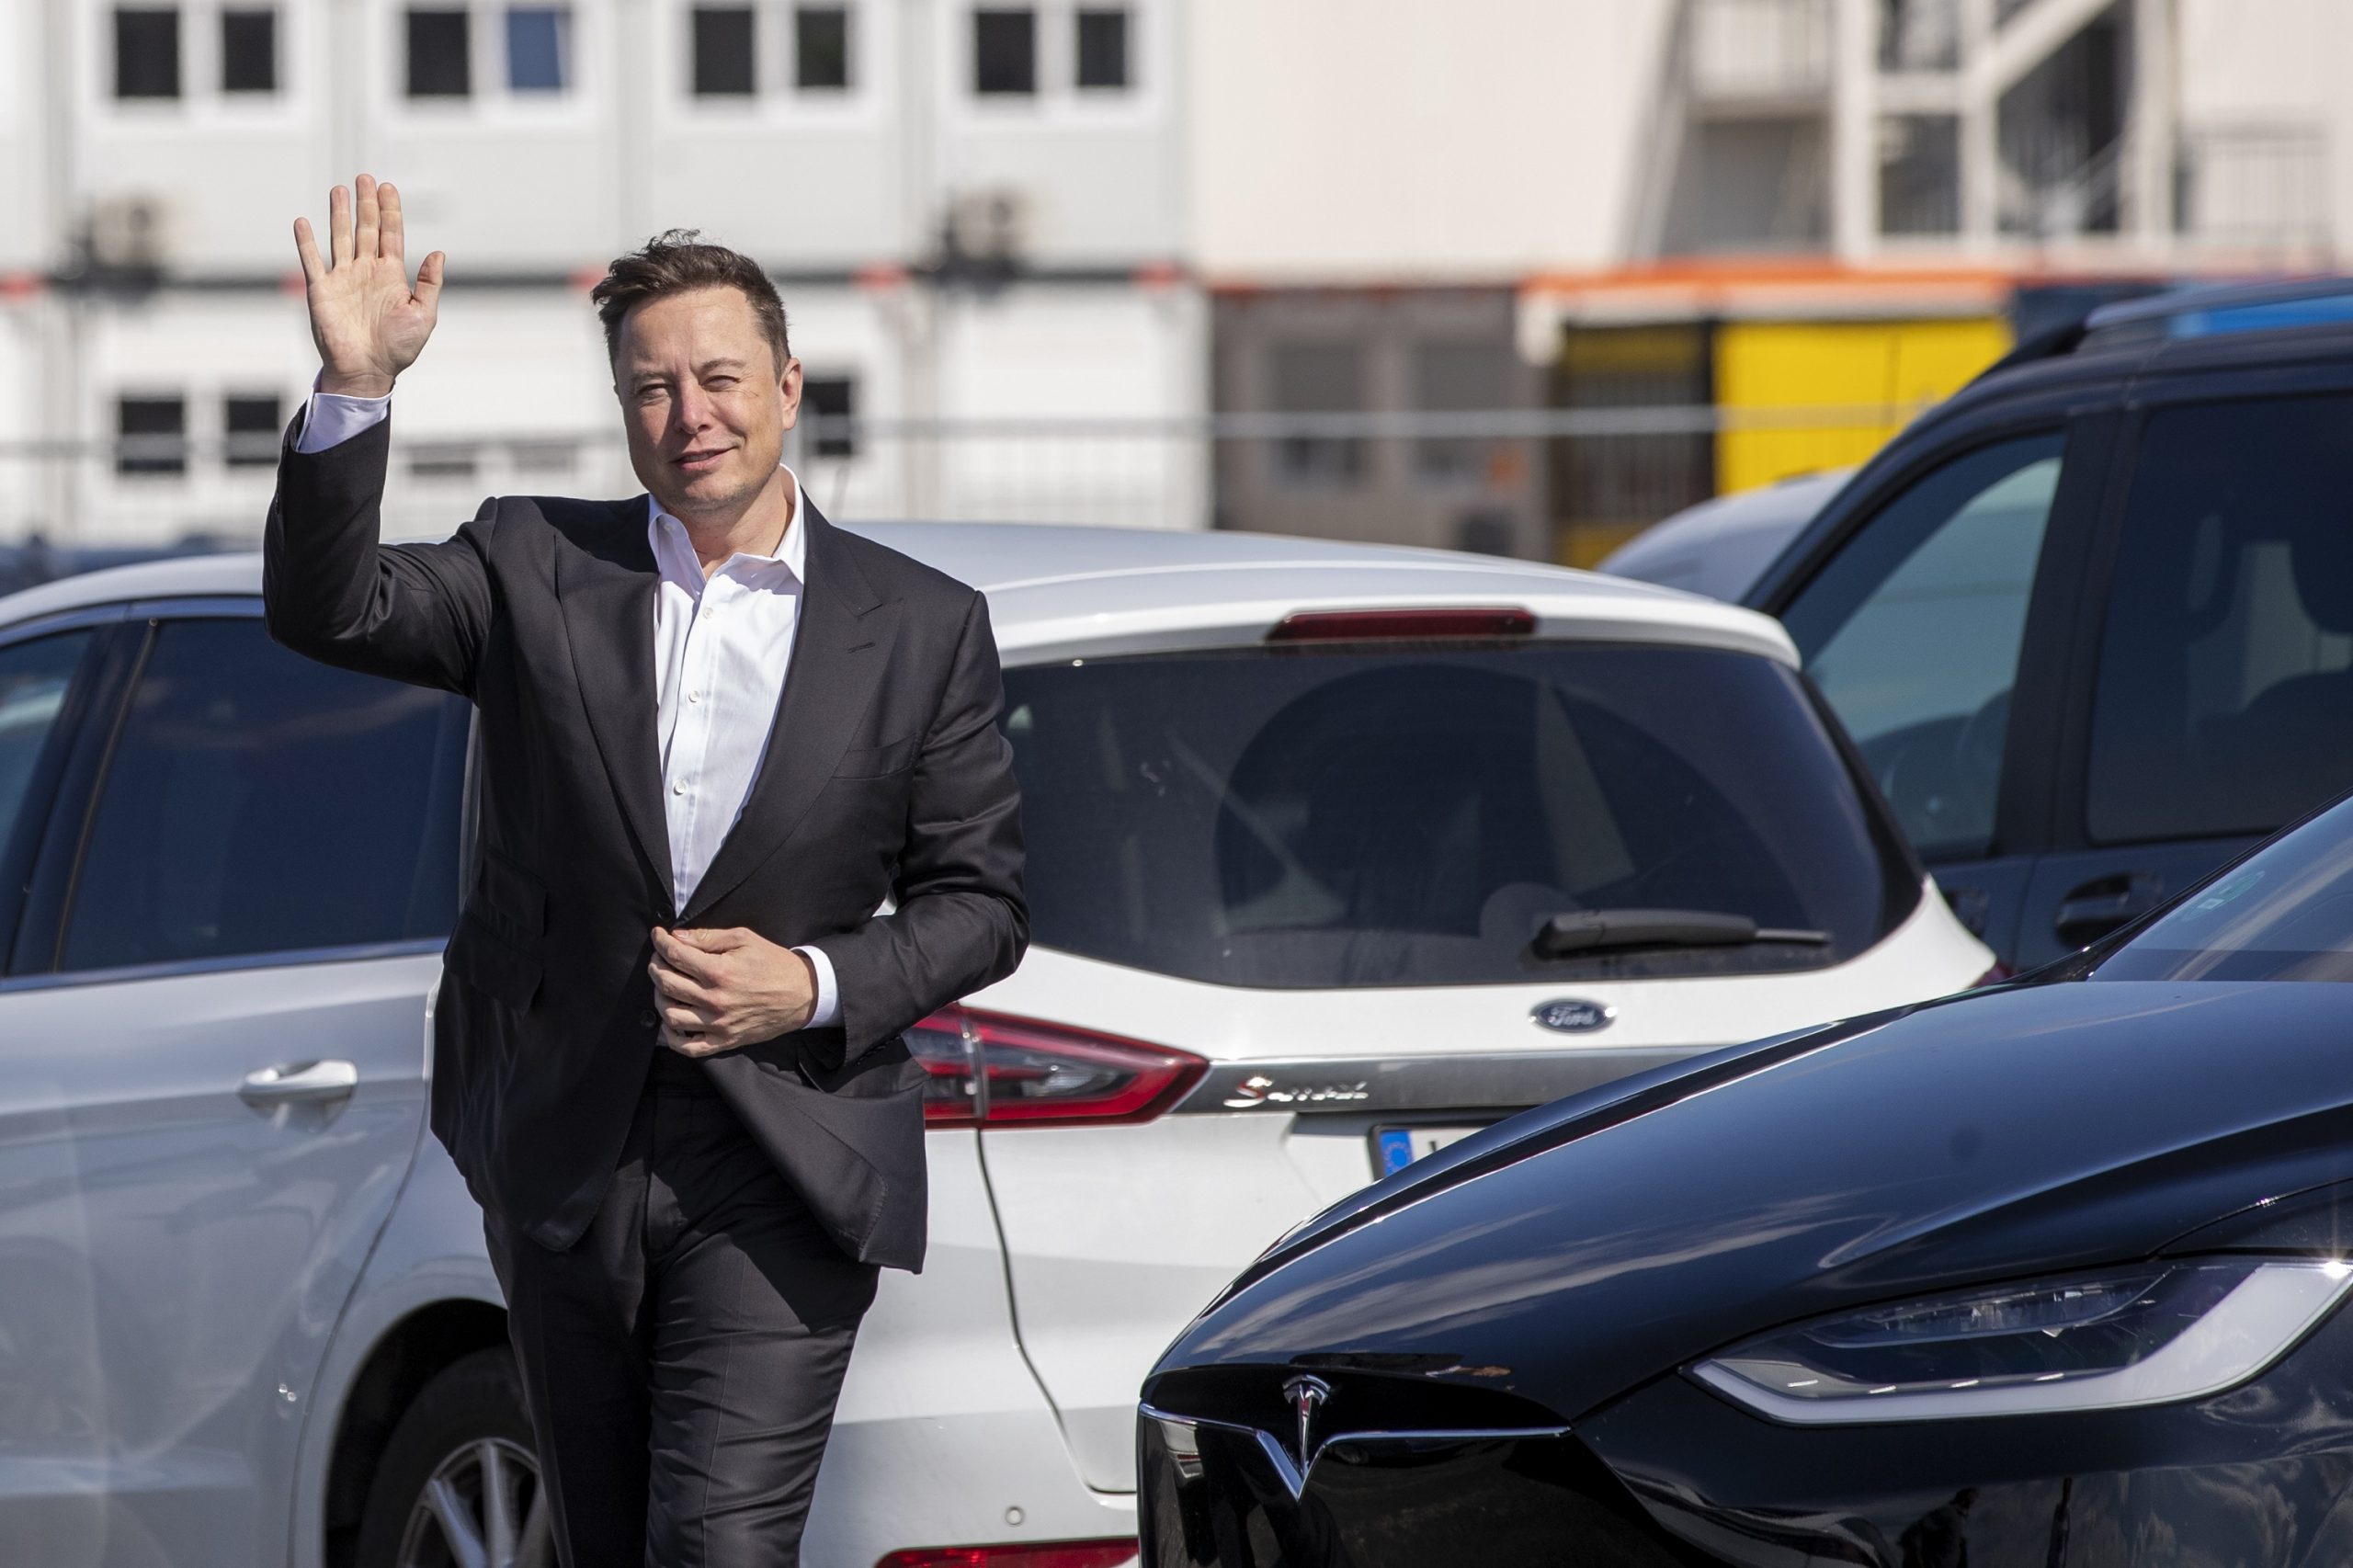 Elon Musk waves to photographers in Germany